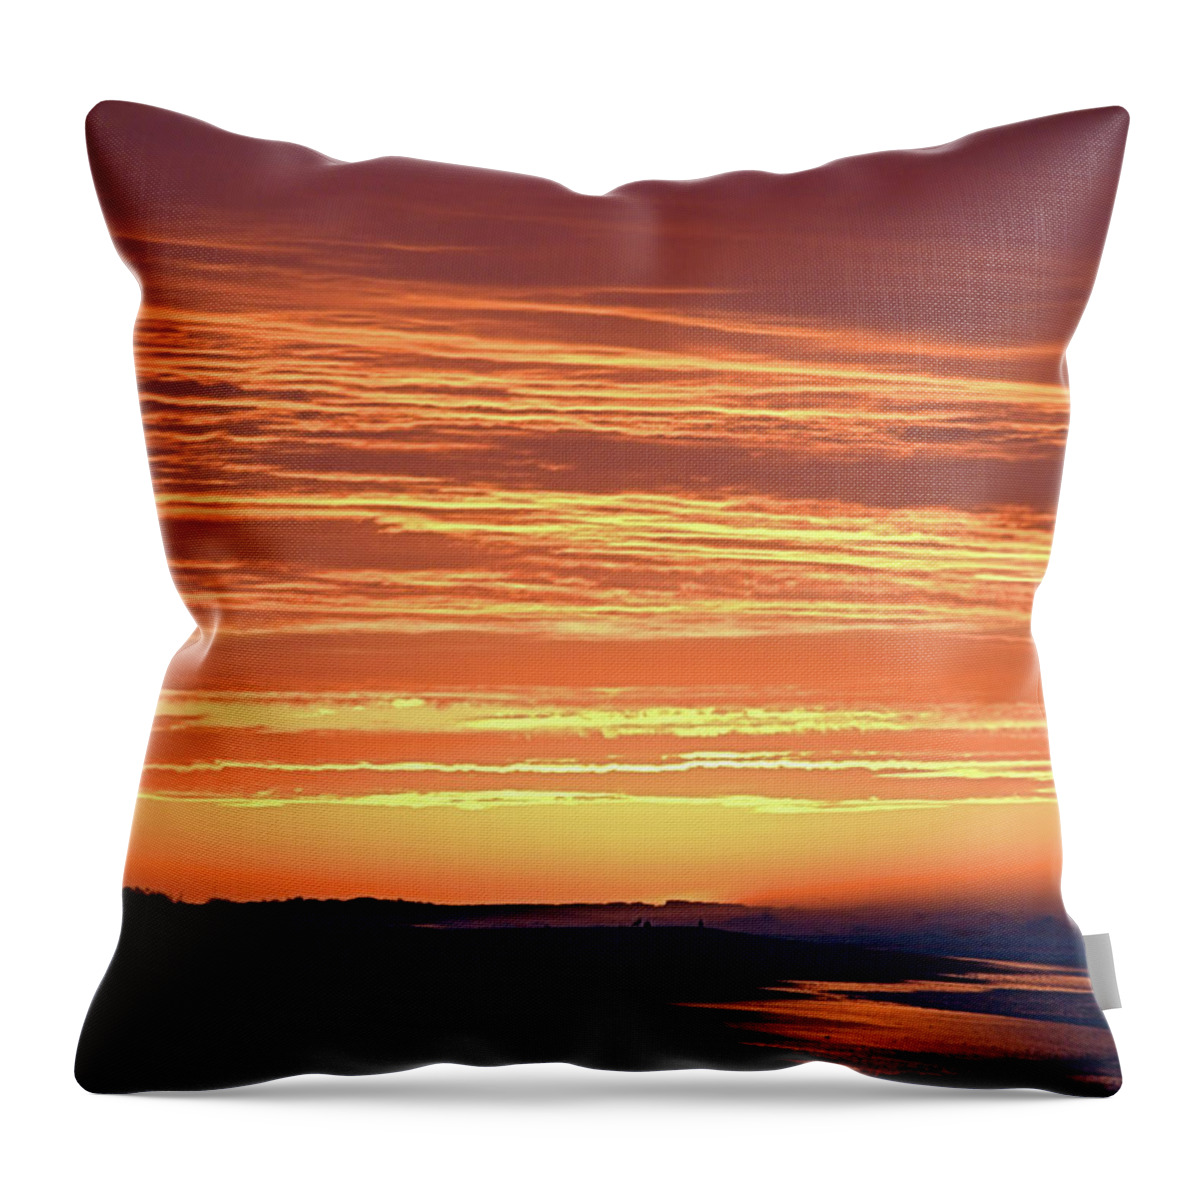 Seas Throw Pillow featuring the photograph Mysterious I I by Newwwman